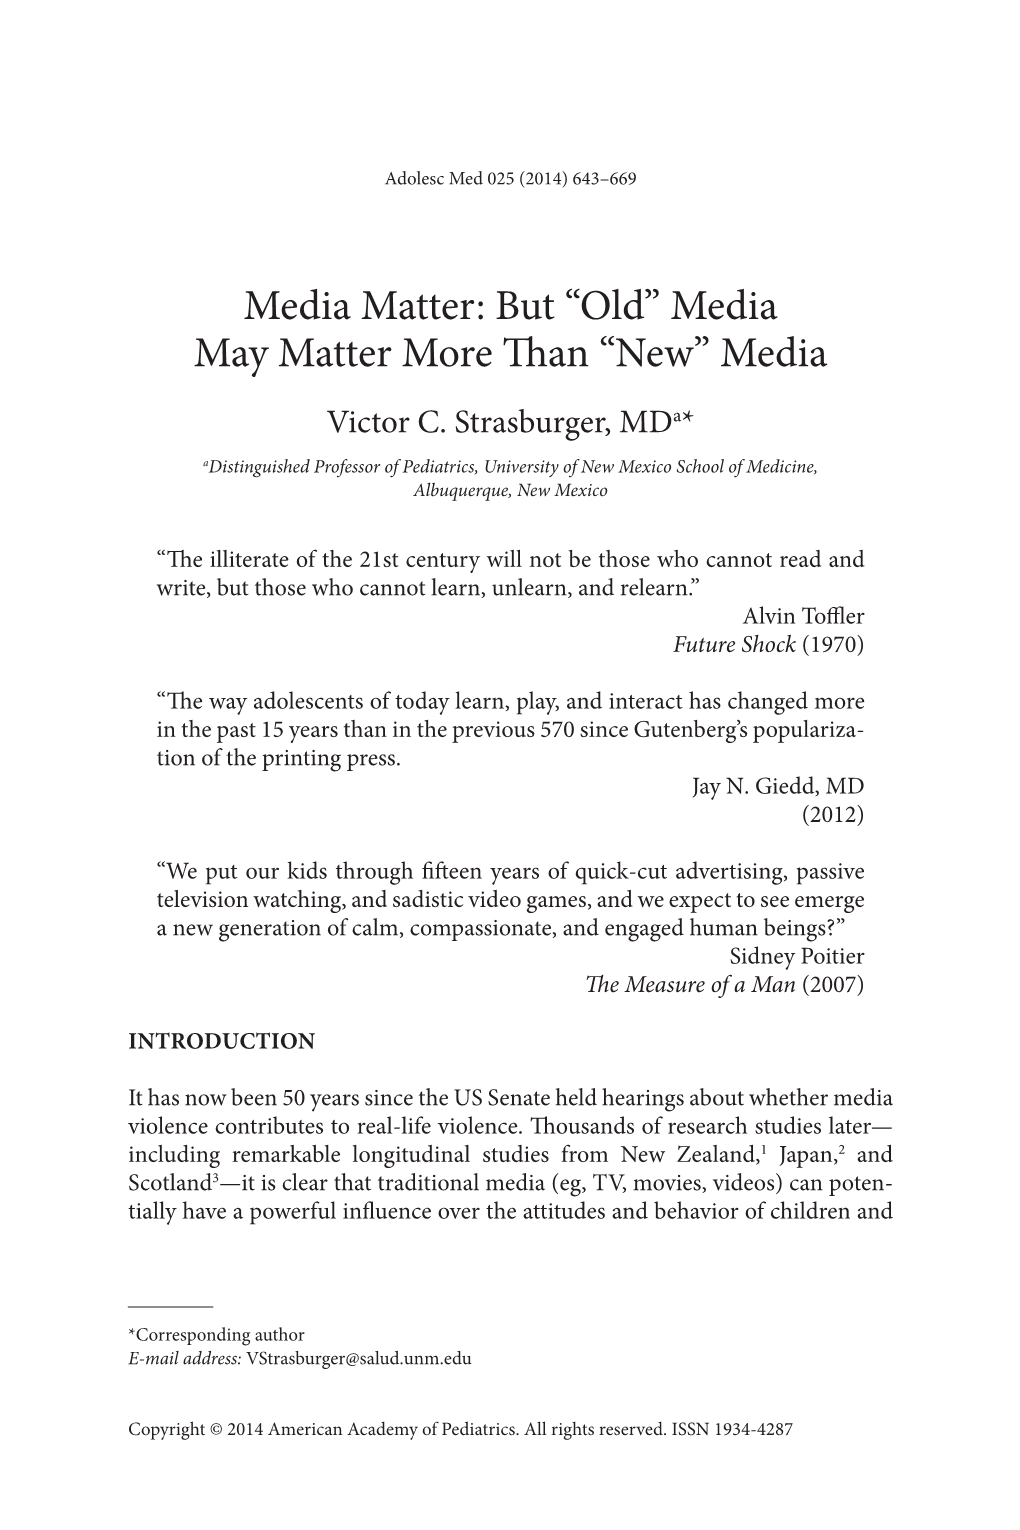 But “Old” Media May Matter More Than “New” Media Victor C